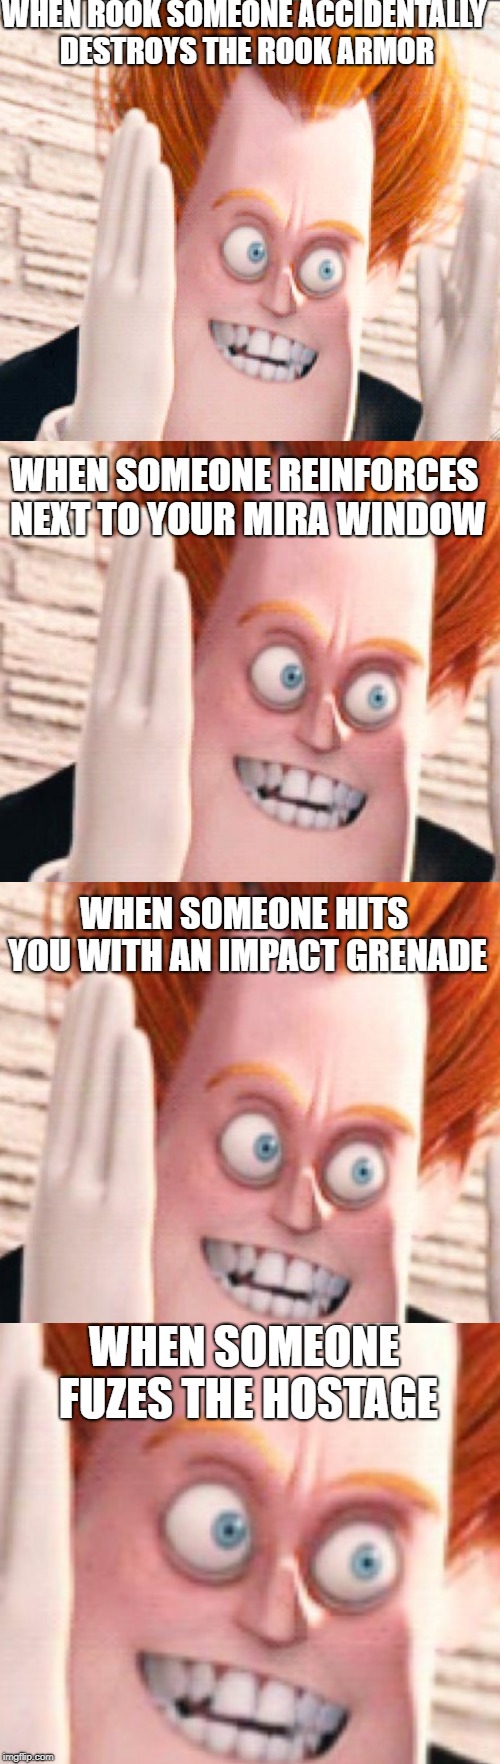 R6S Frustration | WHEN ROOK SOMEONE ACCIDENTALLY DESTROYS THE ROOK ARMOR; WHEN SOMEONE REINFORCES NEXT TO YOUR MIRA WINDOW; WHEN SOMEONE HITS YOU WITH AN IMPACT GRENADE; WHEN SOMEONE FUZES THE HOSTAGE | image tagged in syndrome is tired of the crud,r6s,rainbow six siege,teammates,team | made w/ Imgflip meme maker